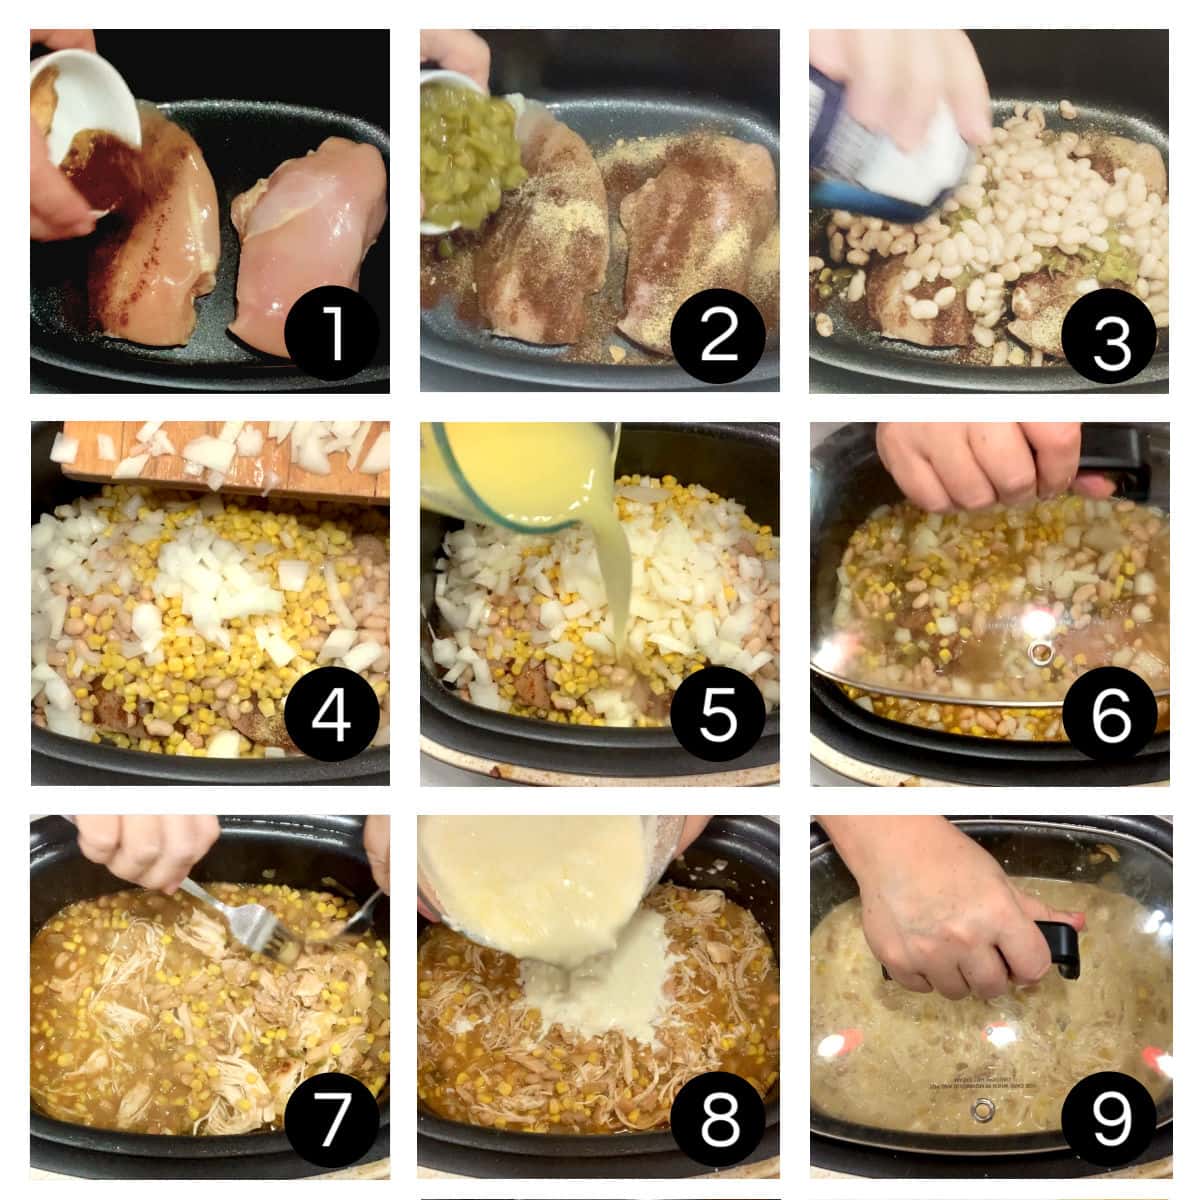 Step by step instructions for this recipe.